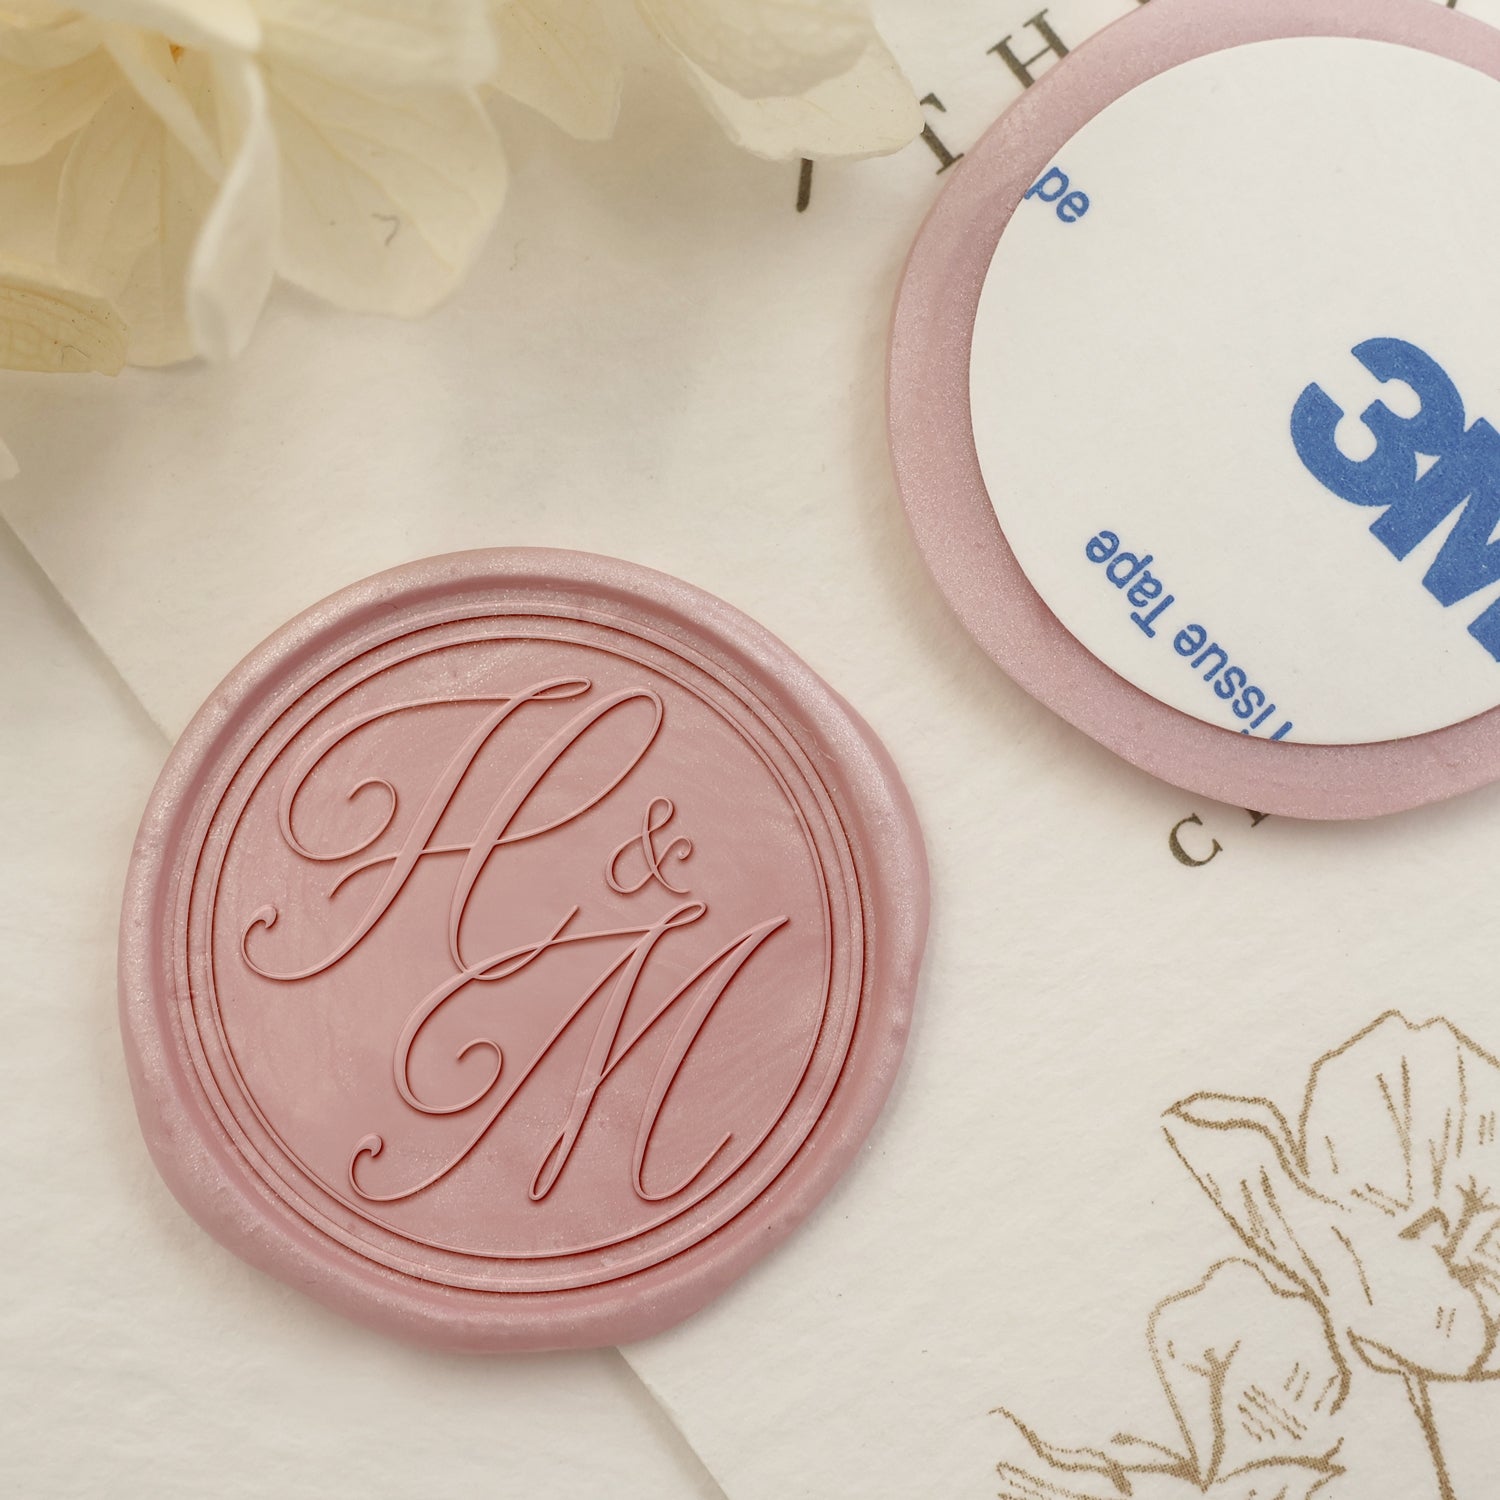 Custom Wax Seal Stickers - Custom Design Self-Adhesive Wax Seal Stickers with Your Artwork